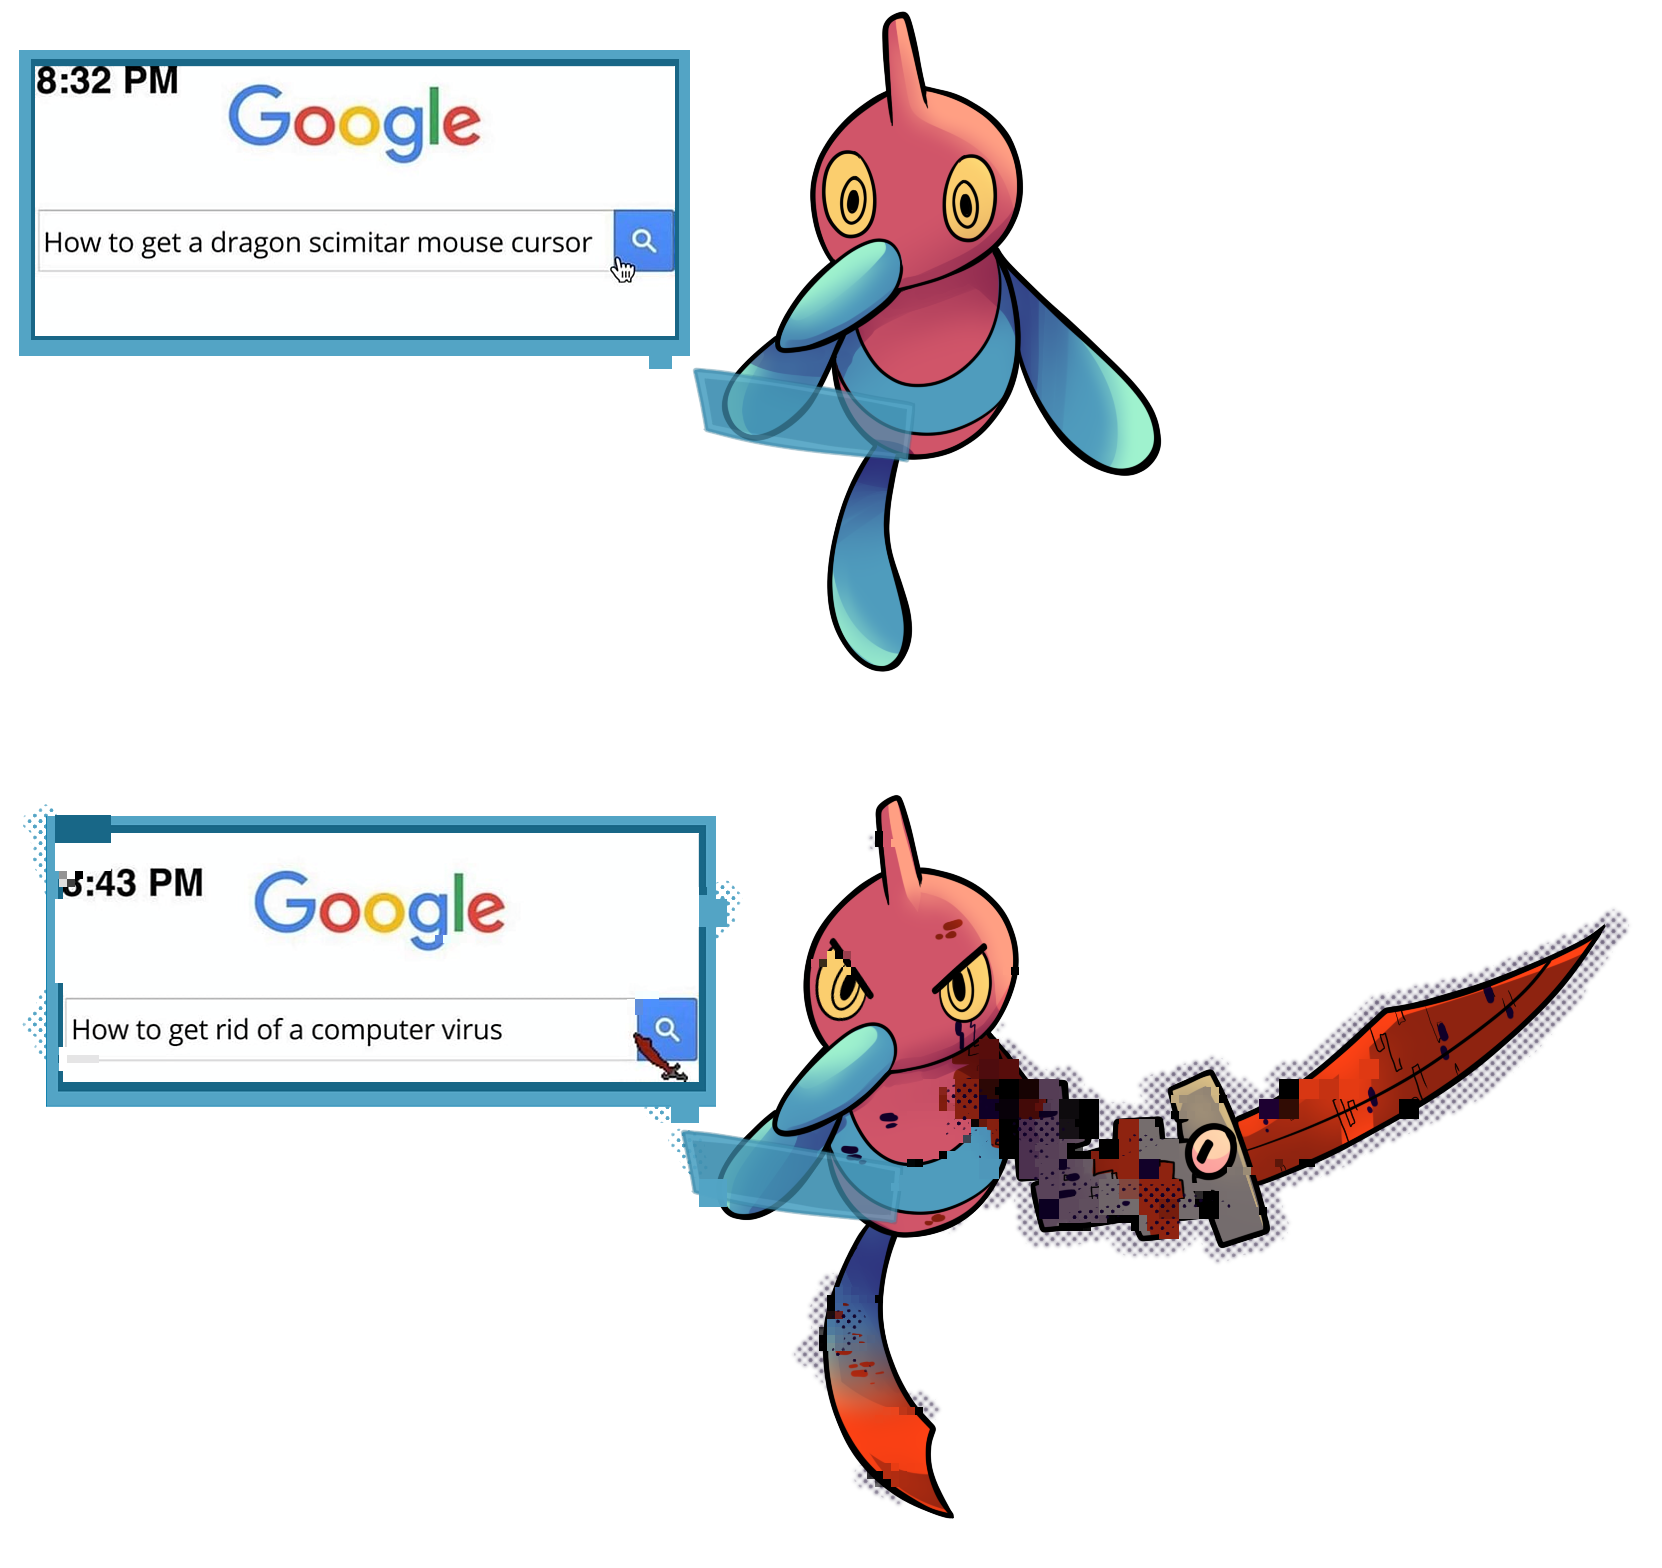 Remember to virus protect you Porygon-Z